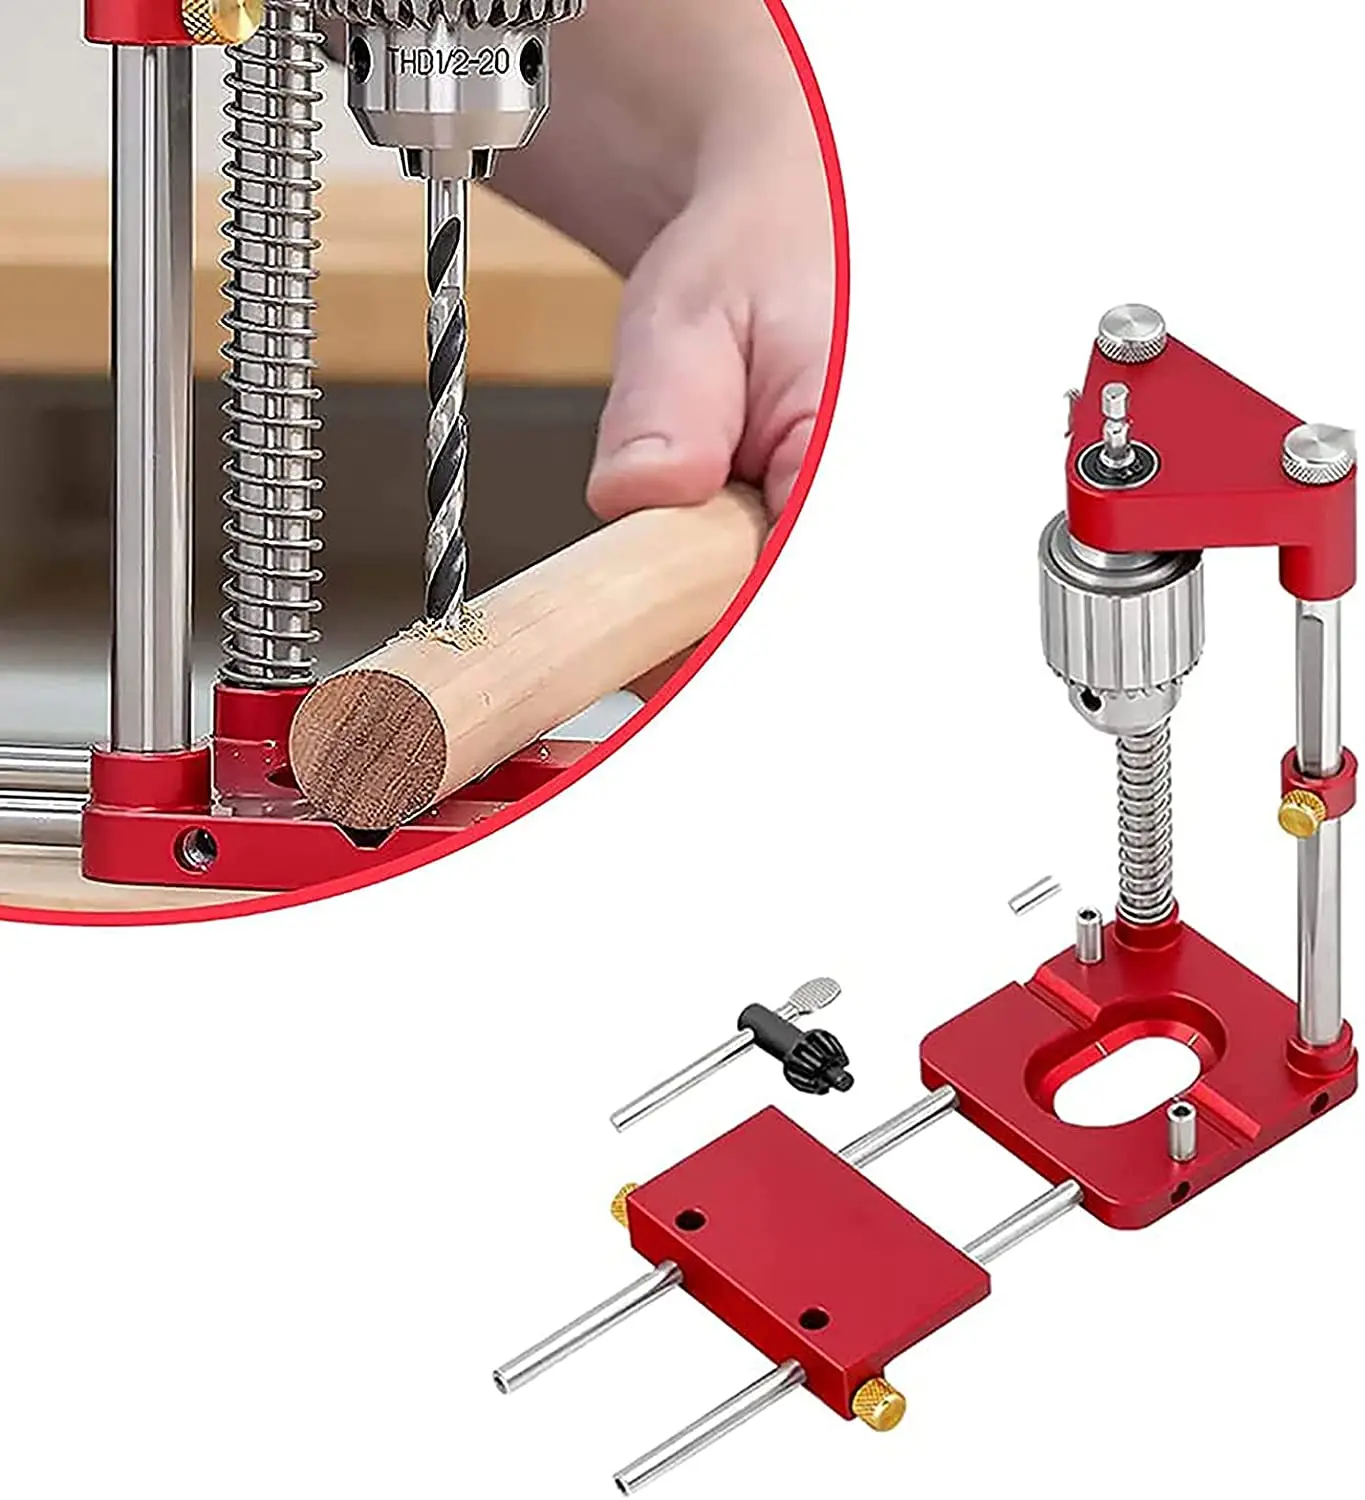 cnc wood router Drill Locator Hole Drill Guide Dowel Jig Convenient Labor Saving Alloy Steel Woodworking Drilling Template Guide Tool for Home horizontal boring machine wood